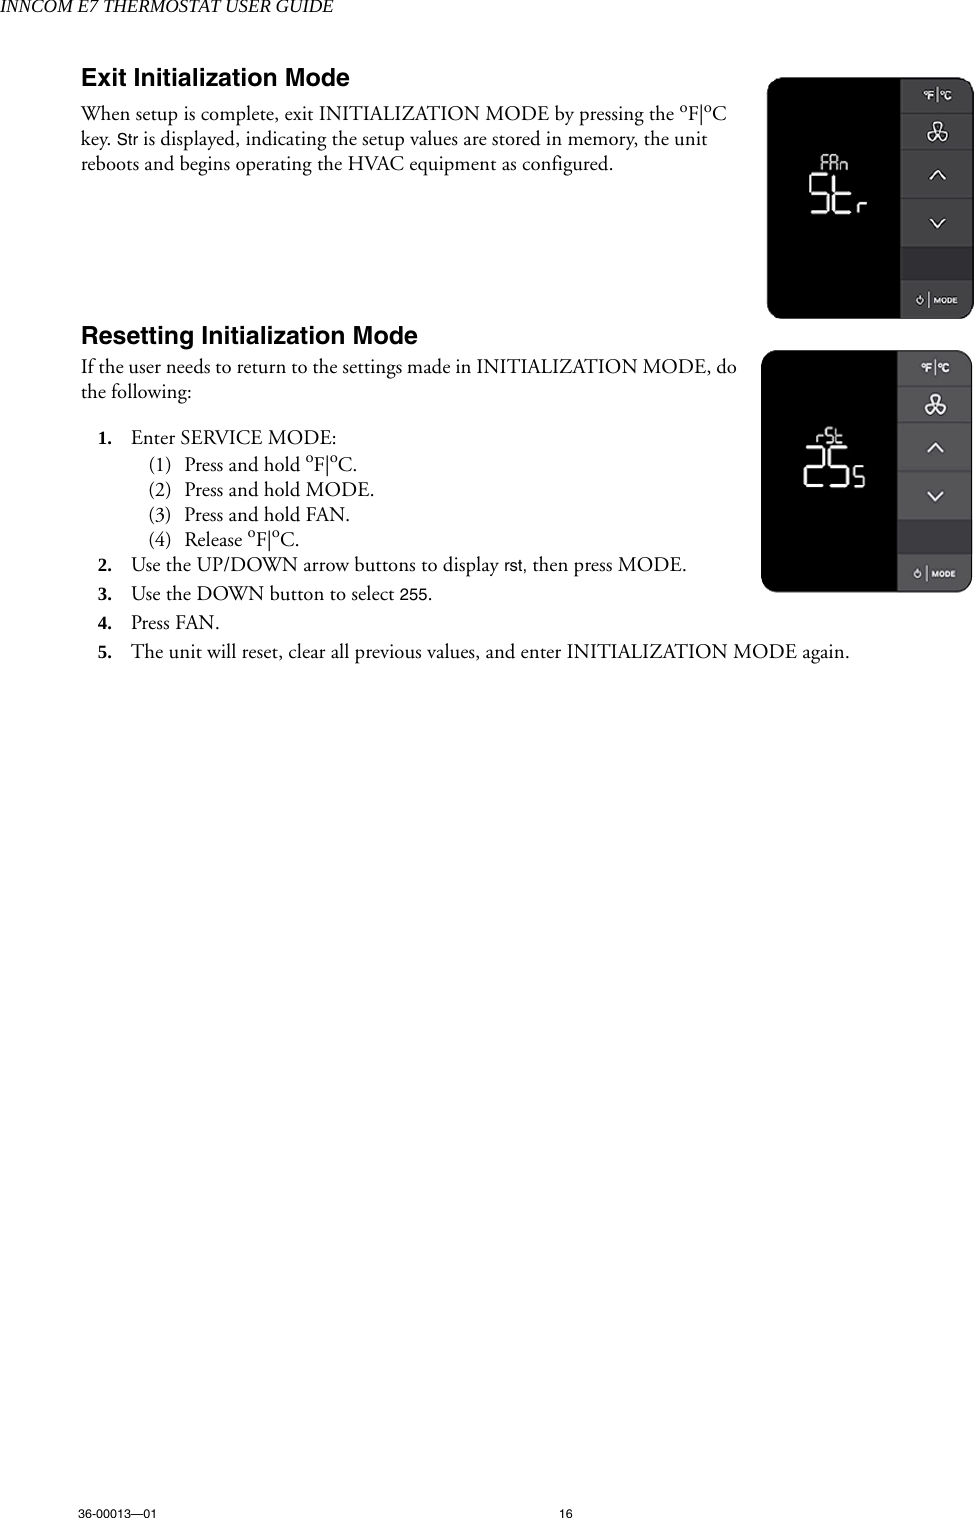 INNCOM E7 THERMOSTAT USER GUIDE36-00013—01 16Exit Initialization ModeWhen setup is complete, exit INITIALIZATION MODE by pressing the oF|oC key. Str is displayed, indicating the setup values are stored in memory, the unit reboots and begins operating the HVAC equipment as configured. Resetting Initialization ModeIf the user needs to return to the settings made in INITIALIZATION MODE, do the following:1. Enter SERVICE MODE:(1) Press and hold oF|oC.(2) Press and hold MODE.(3) Press and hold FAN.(4) Release oF|oC.2. Use the UP/DOWN arrow buttons to display rst, then press MODE.3. Use the DOWN button to select 255.4. Press FAN.5. The unit will reset, clear all previous values, and enter INITIALIZATION MODE again. 